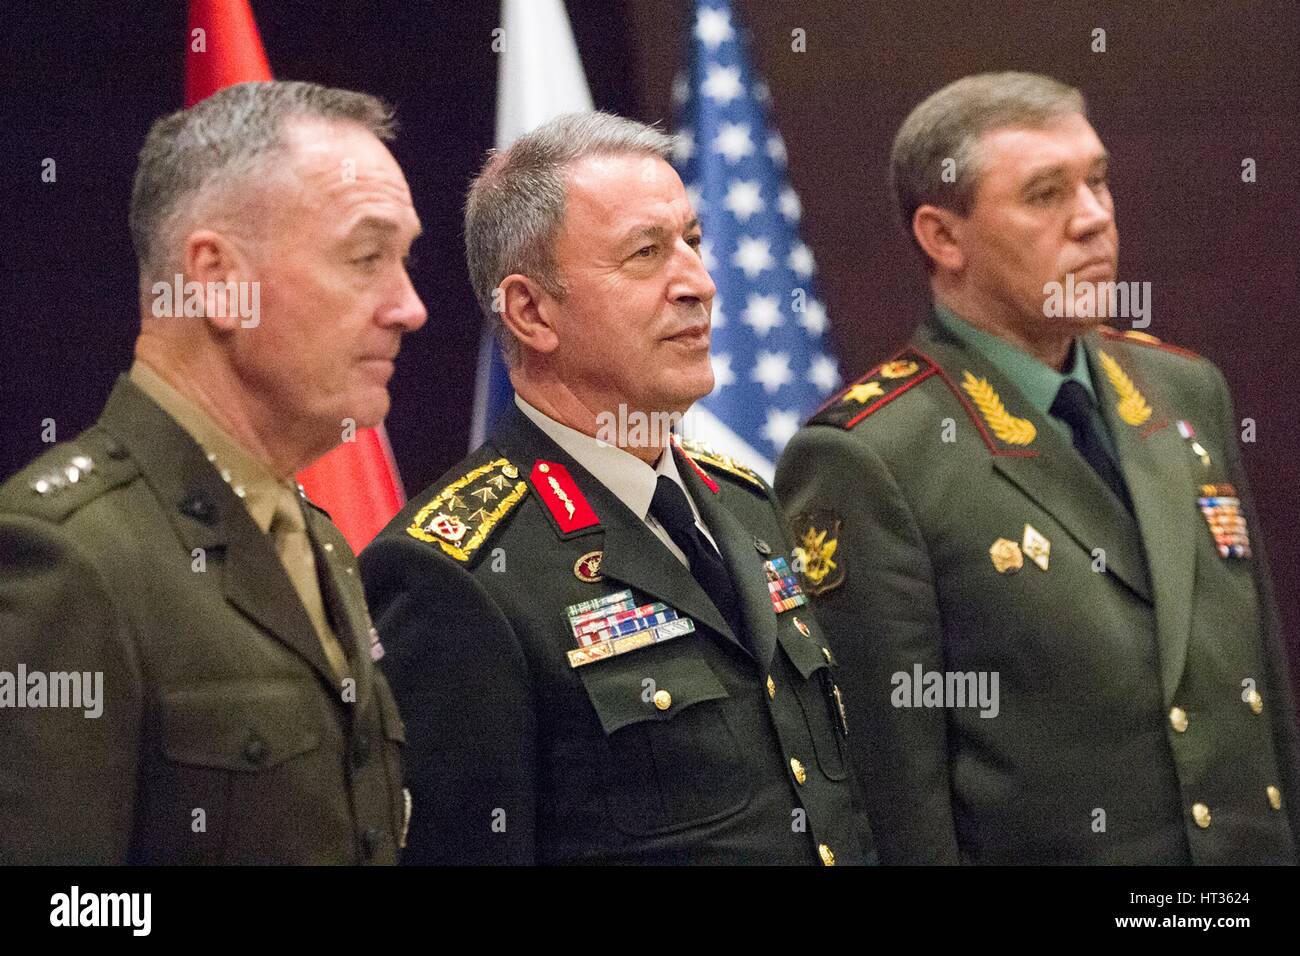 Antalya, Turkey. 7th Mar, 2017. U.S. Joint Chiefs Chairman Gen. Joseph Dunford, left, with Turkish Gen. Hulusi Akar and Russian Gen. Valery Gerasimov, right, during meetings March 7, 2017 in Antalya, Turkey. The three chiefs of defense are meeting to discuss operations in Syria. Credit: Planetpix/Alamy Live News Stock Photo